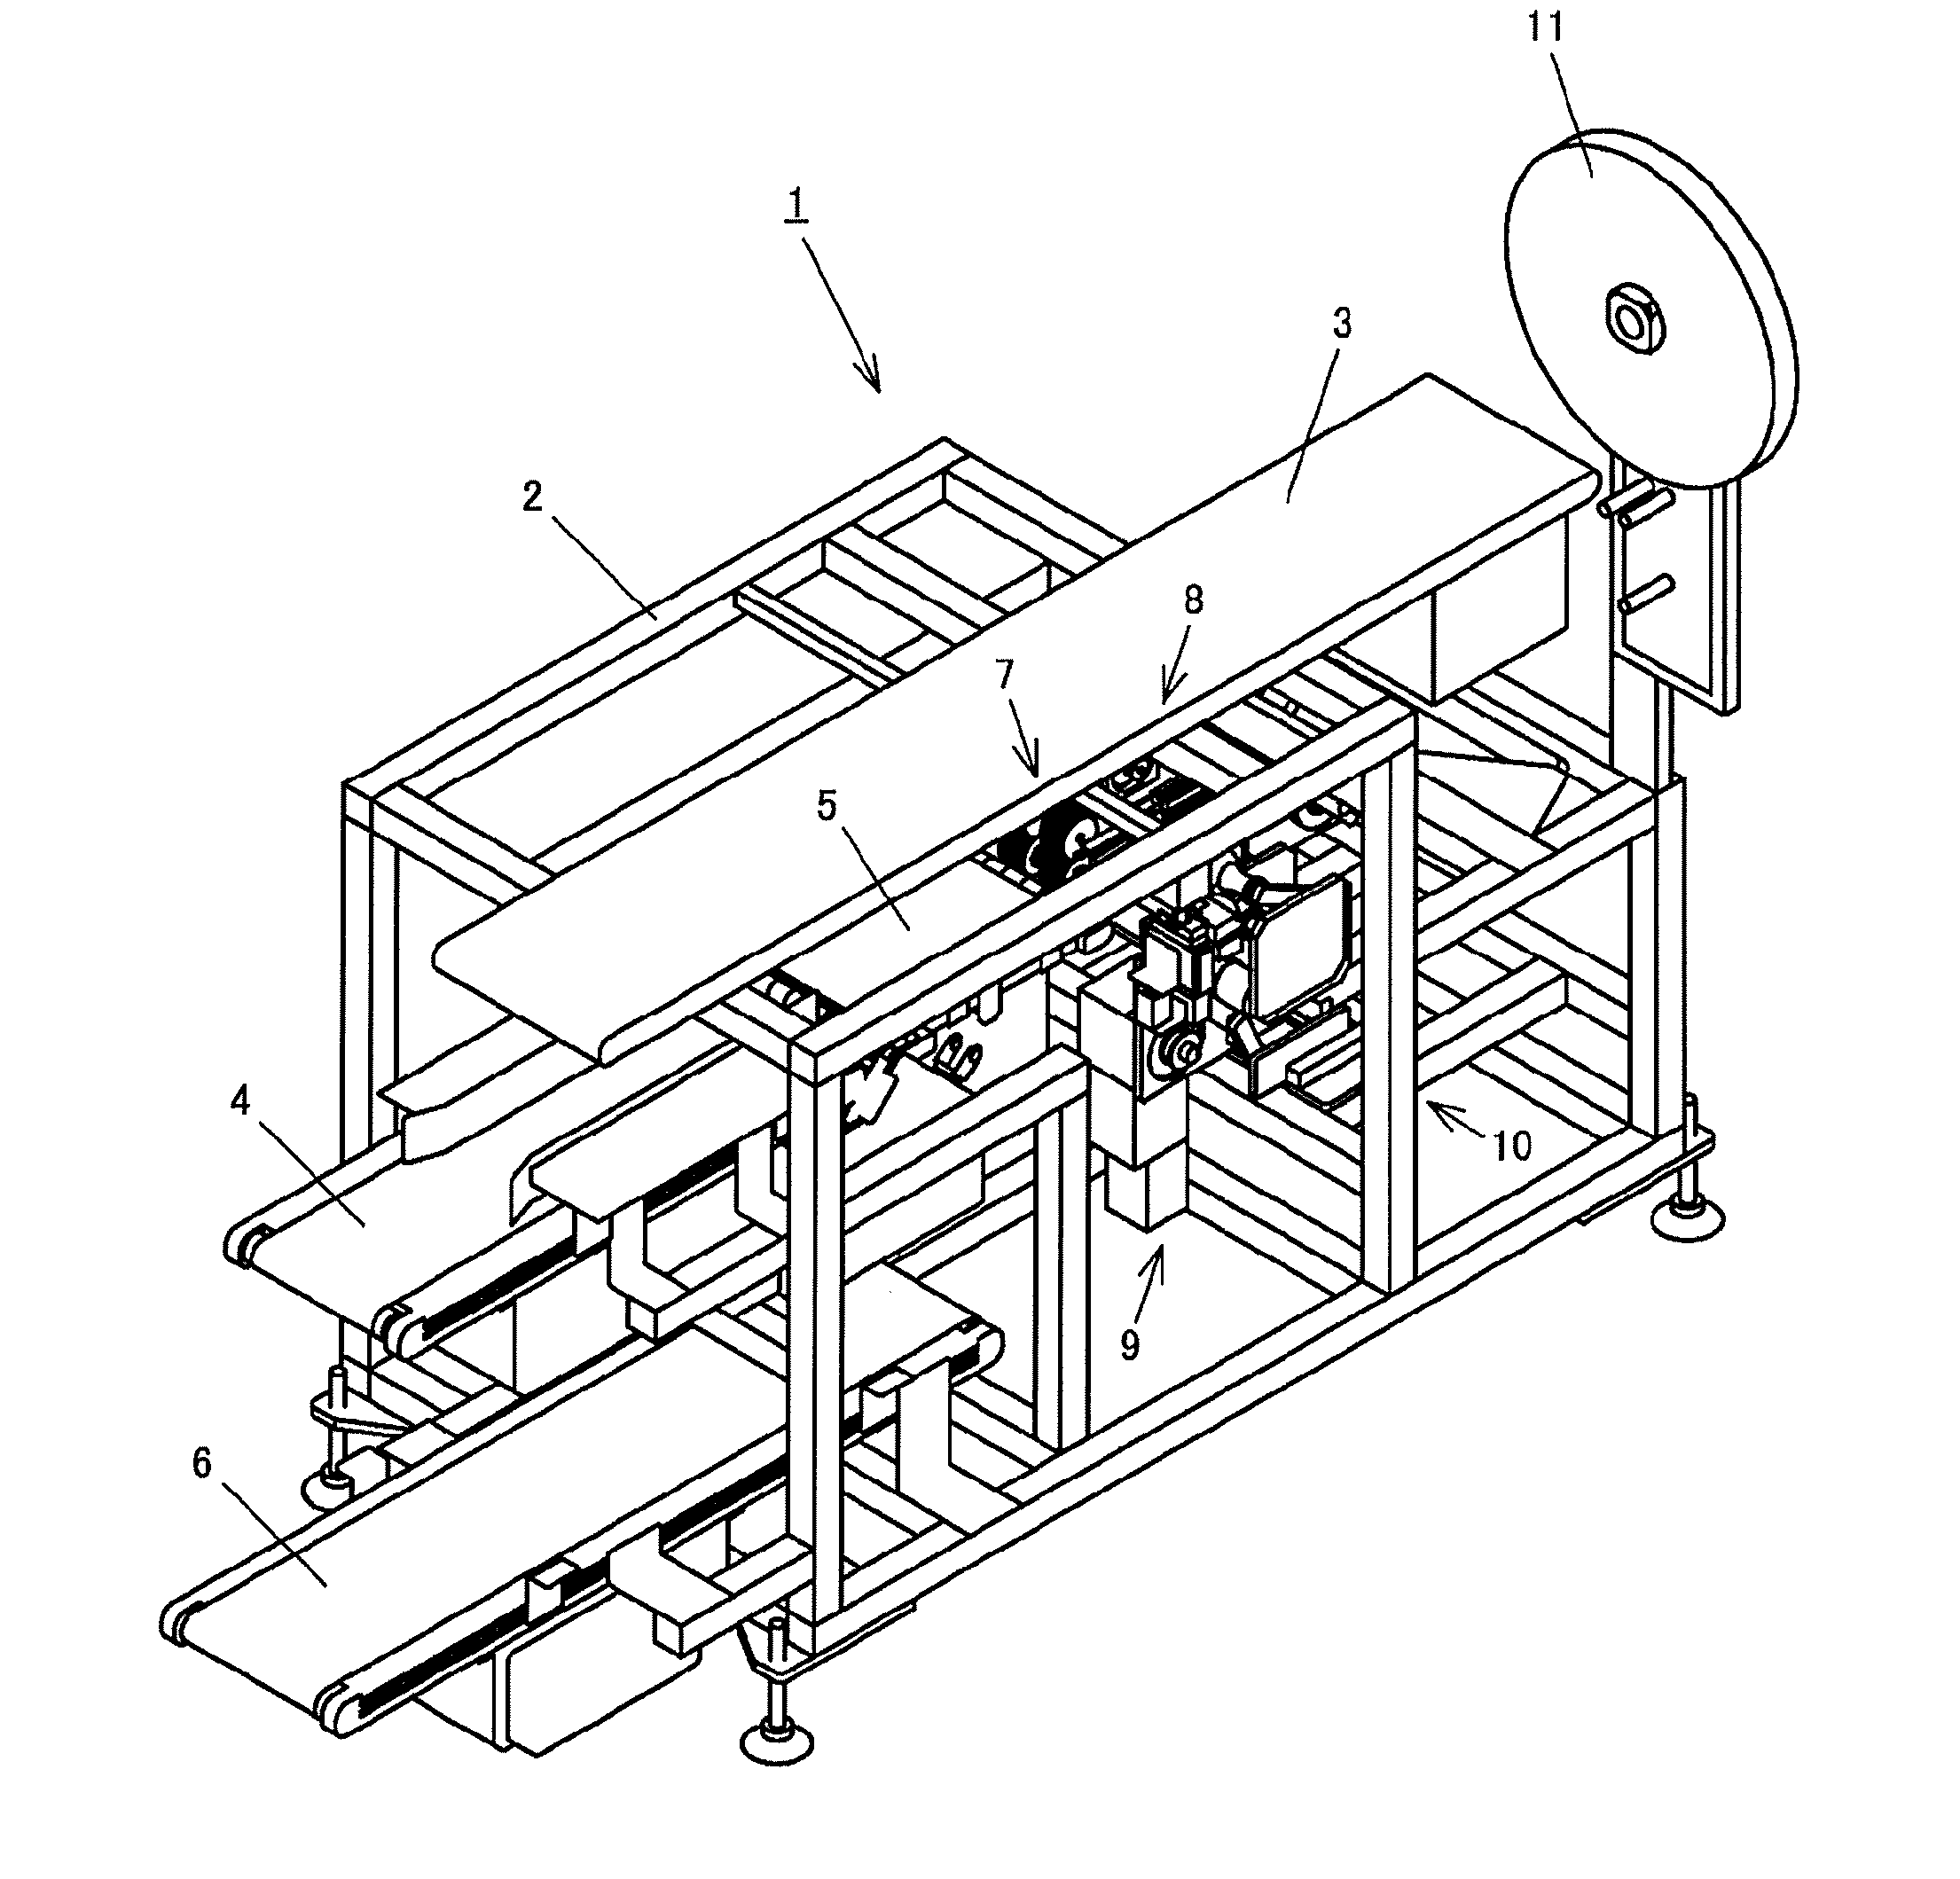 Strip pack apparatus, and grasper device and dewrinkler device used therein